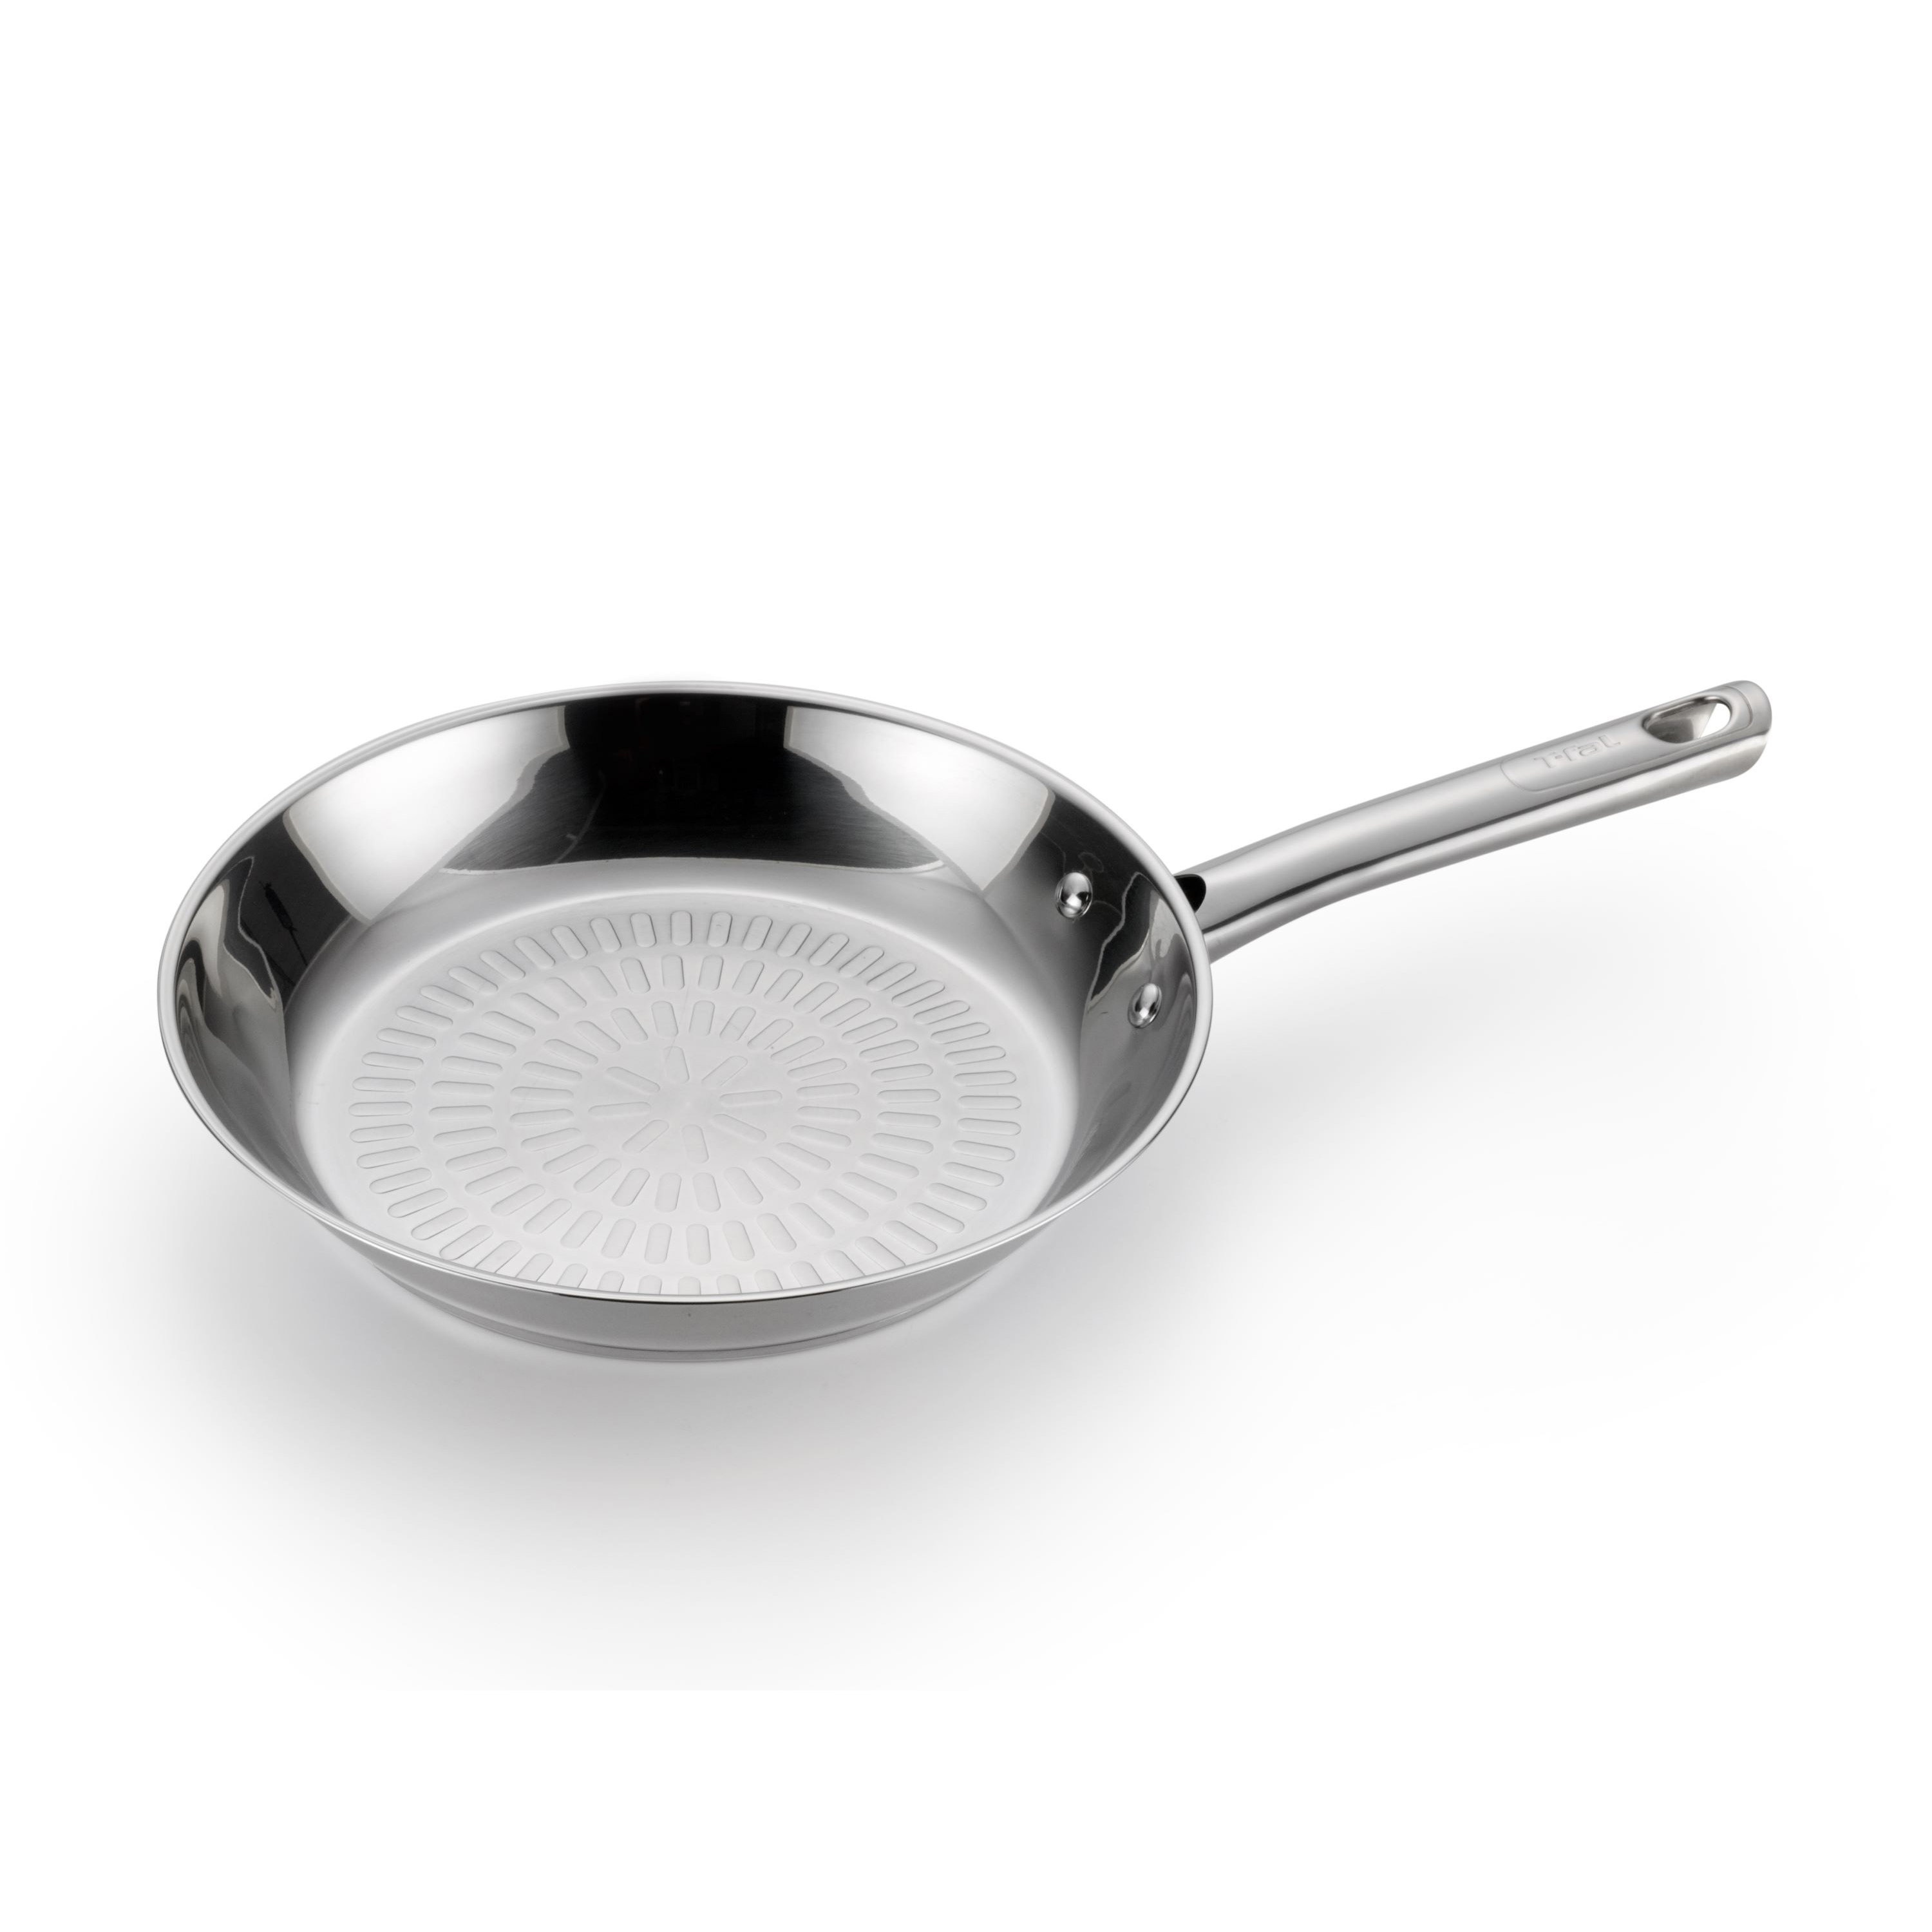 T-fal Professional Nonstick 10.25-Inch Fry Pan 